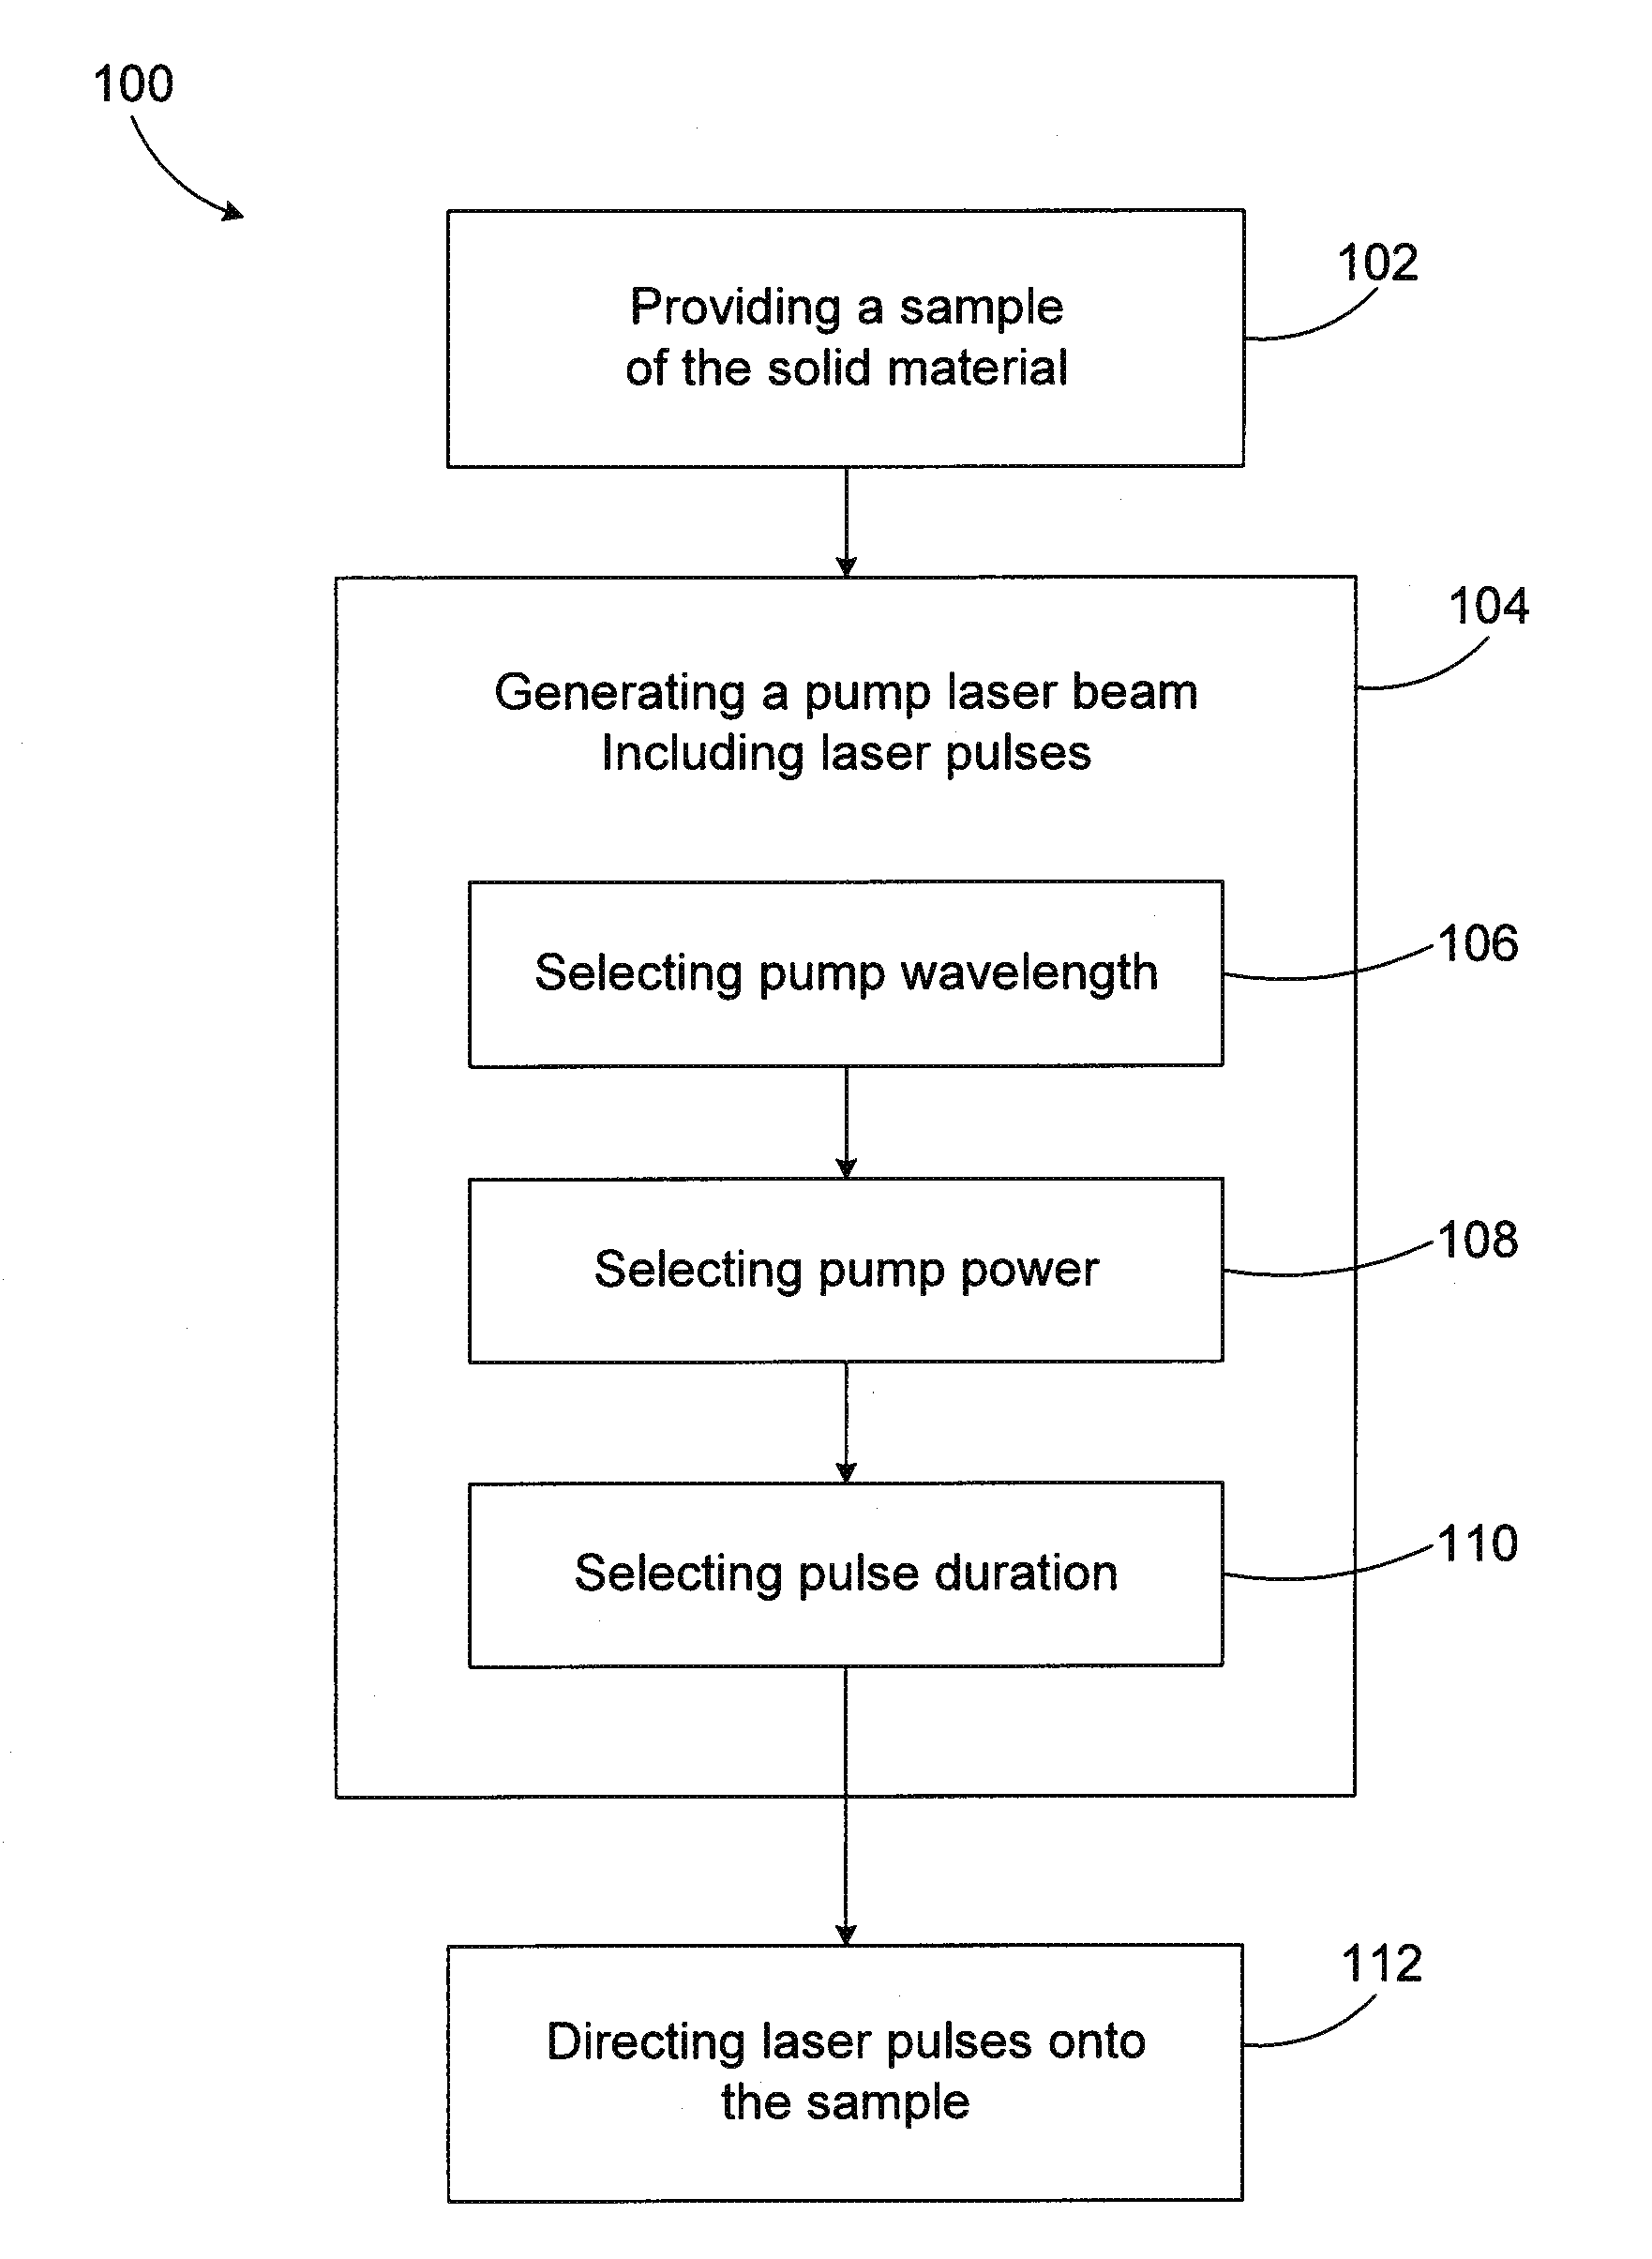 Methods for laser cooling of fluorescent materials